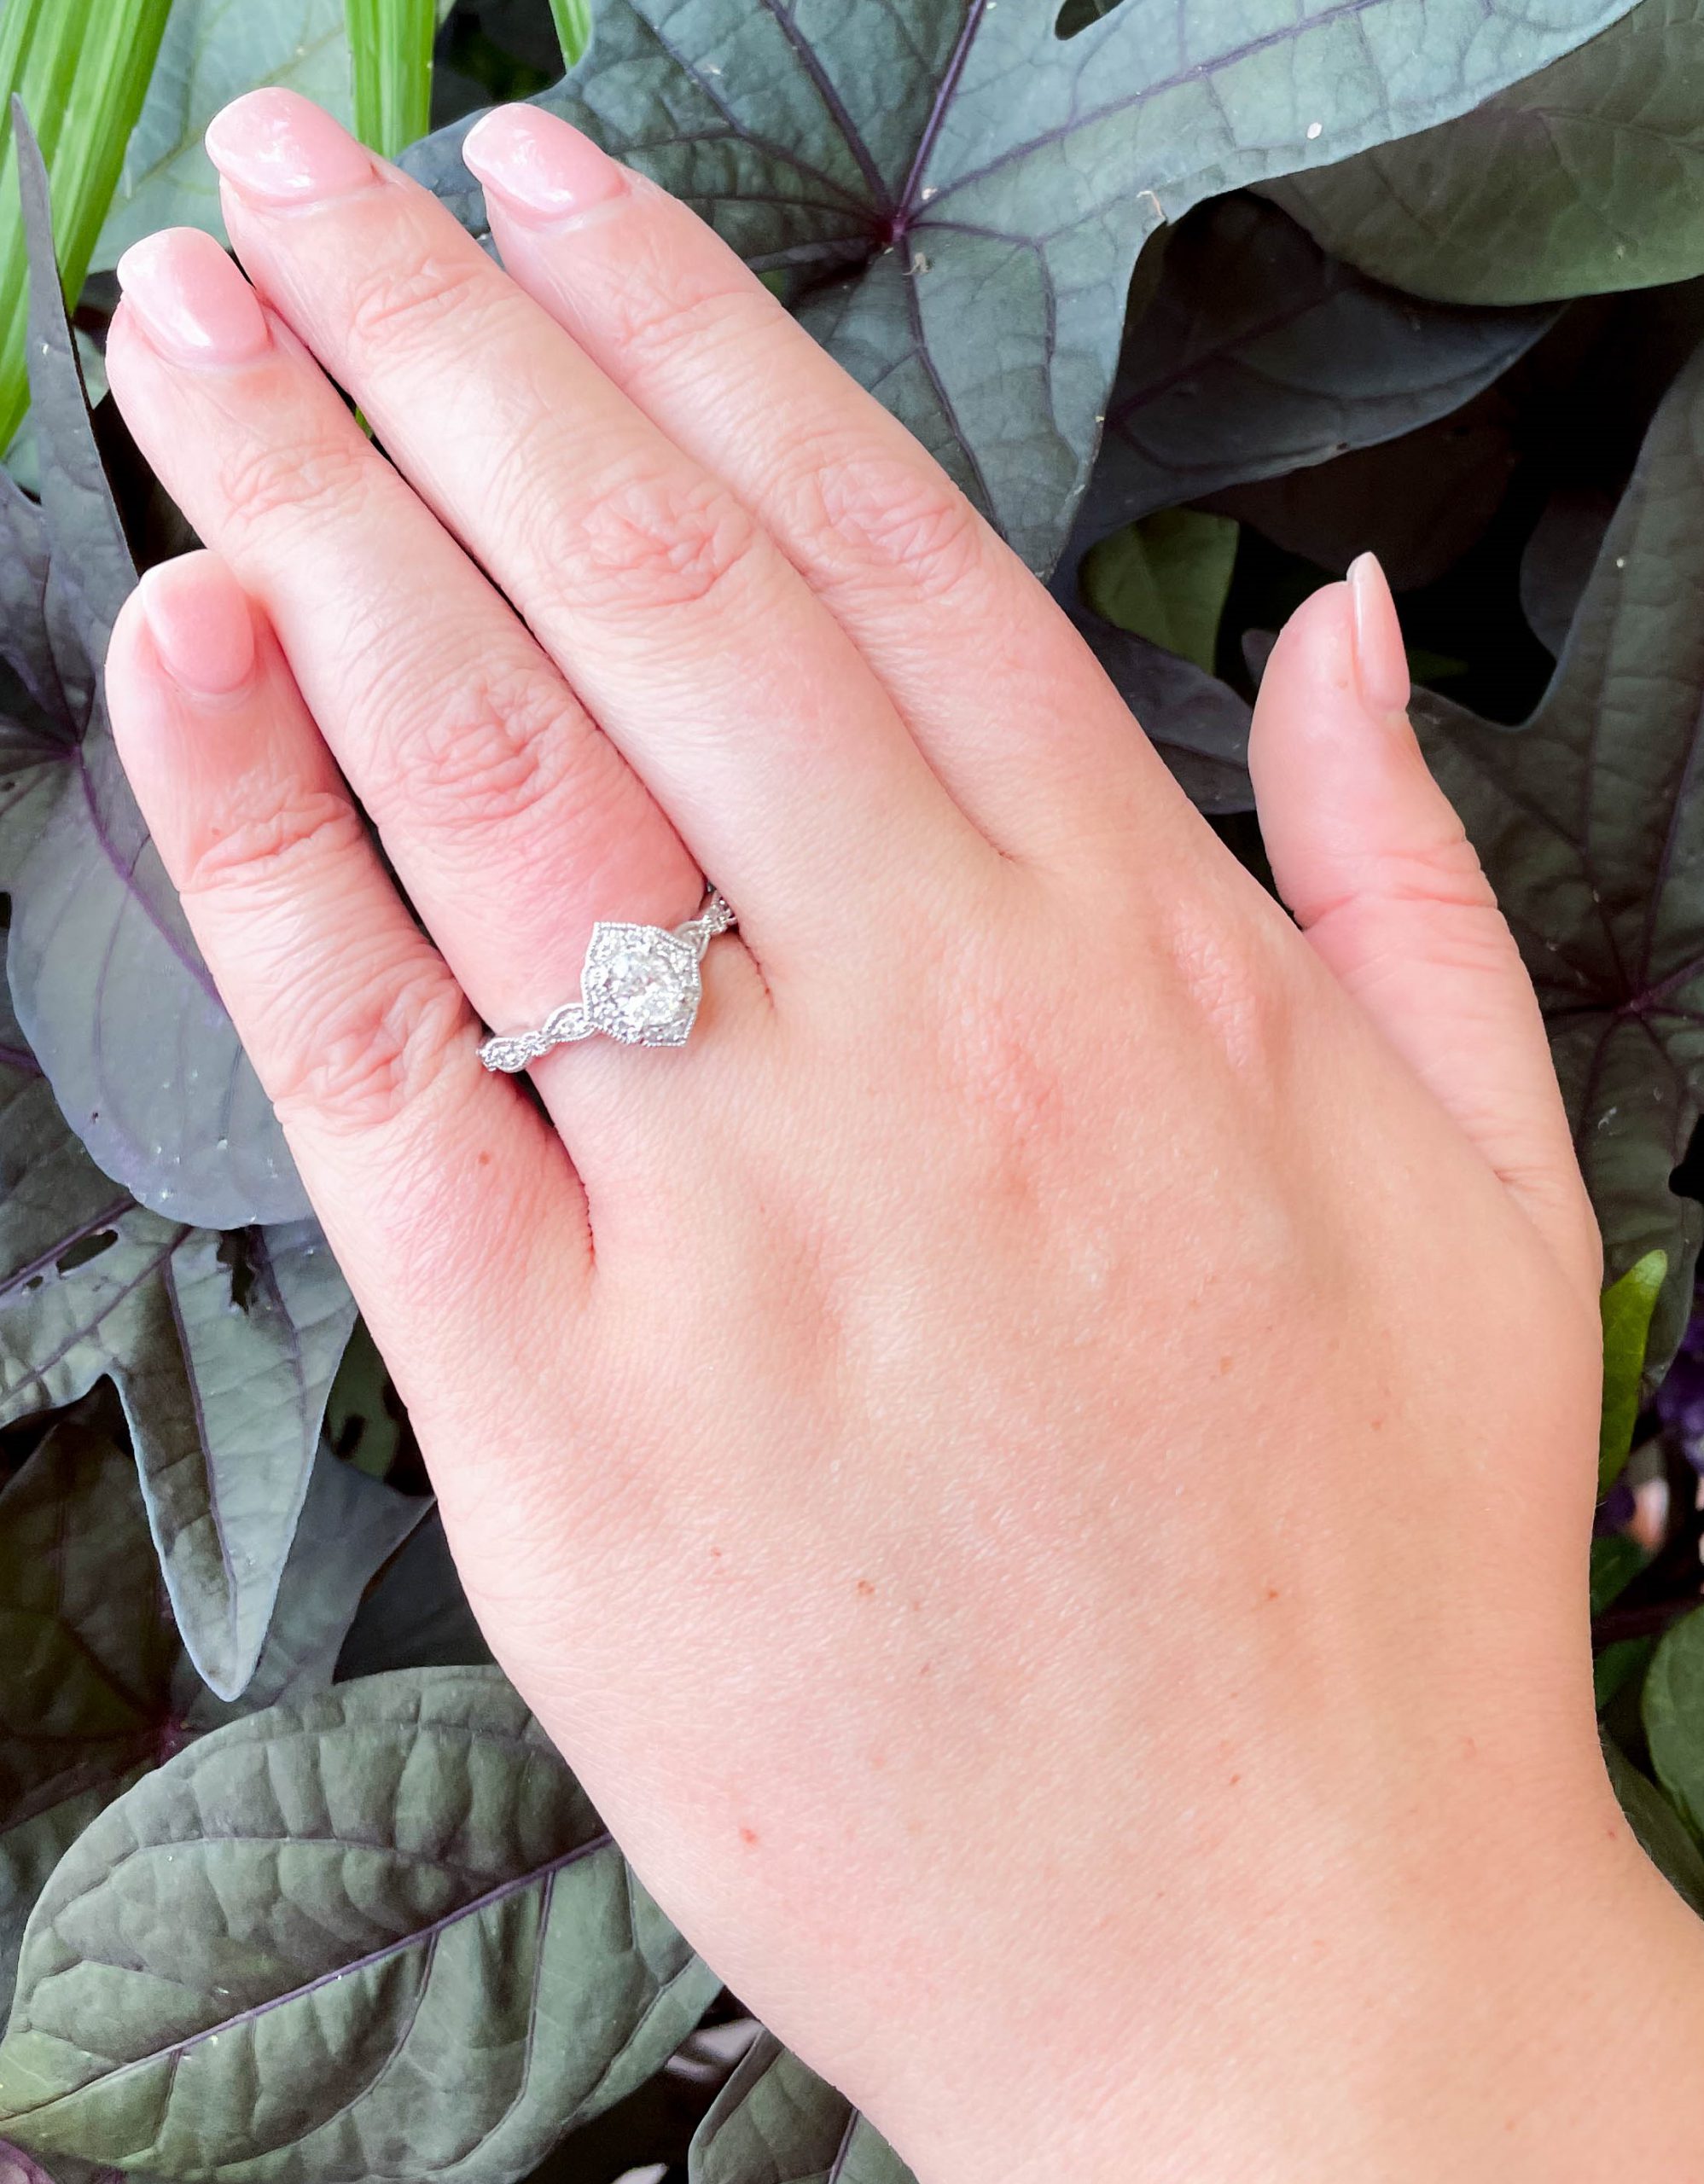 All the Details on Lady Gaga's Massive, Heart-Shaped Engagement Ring!